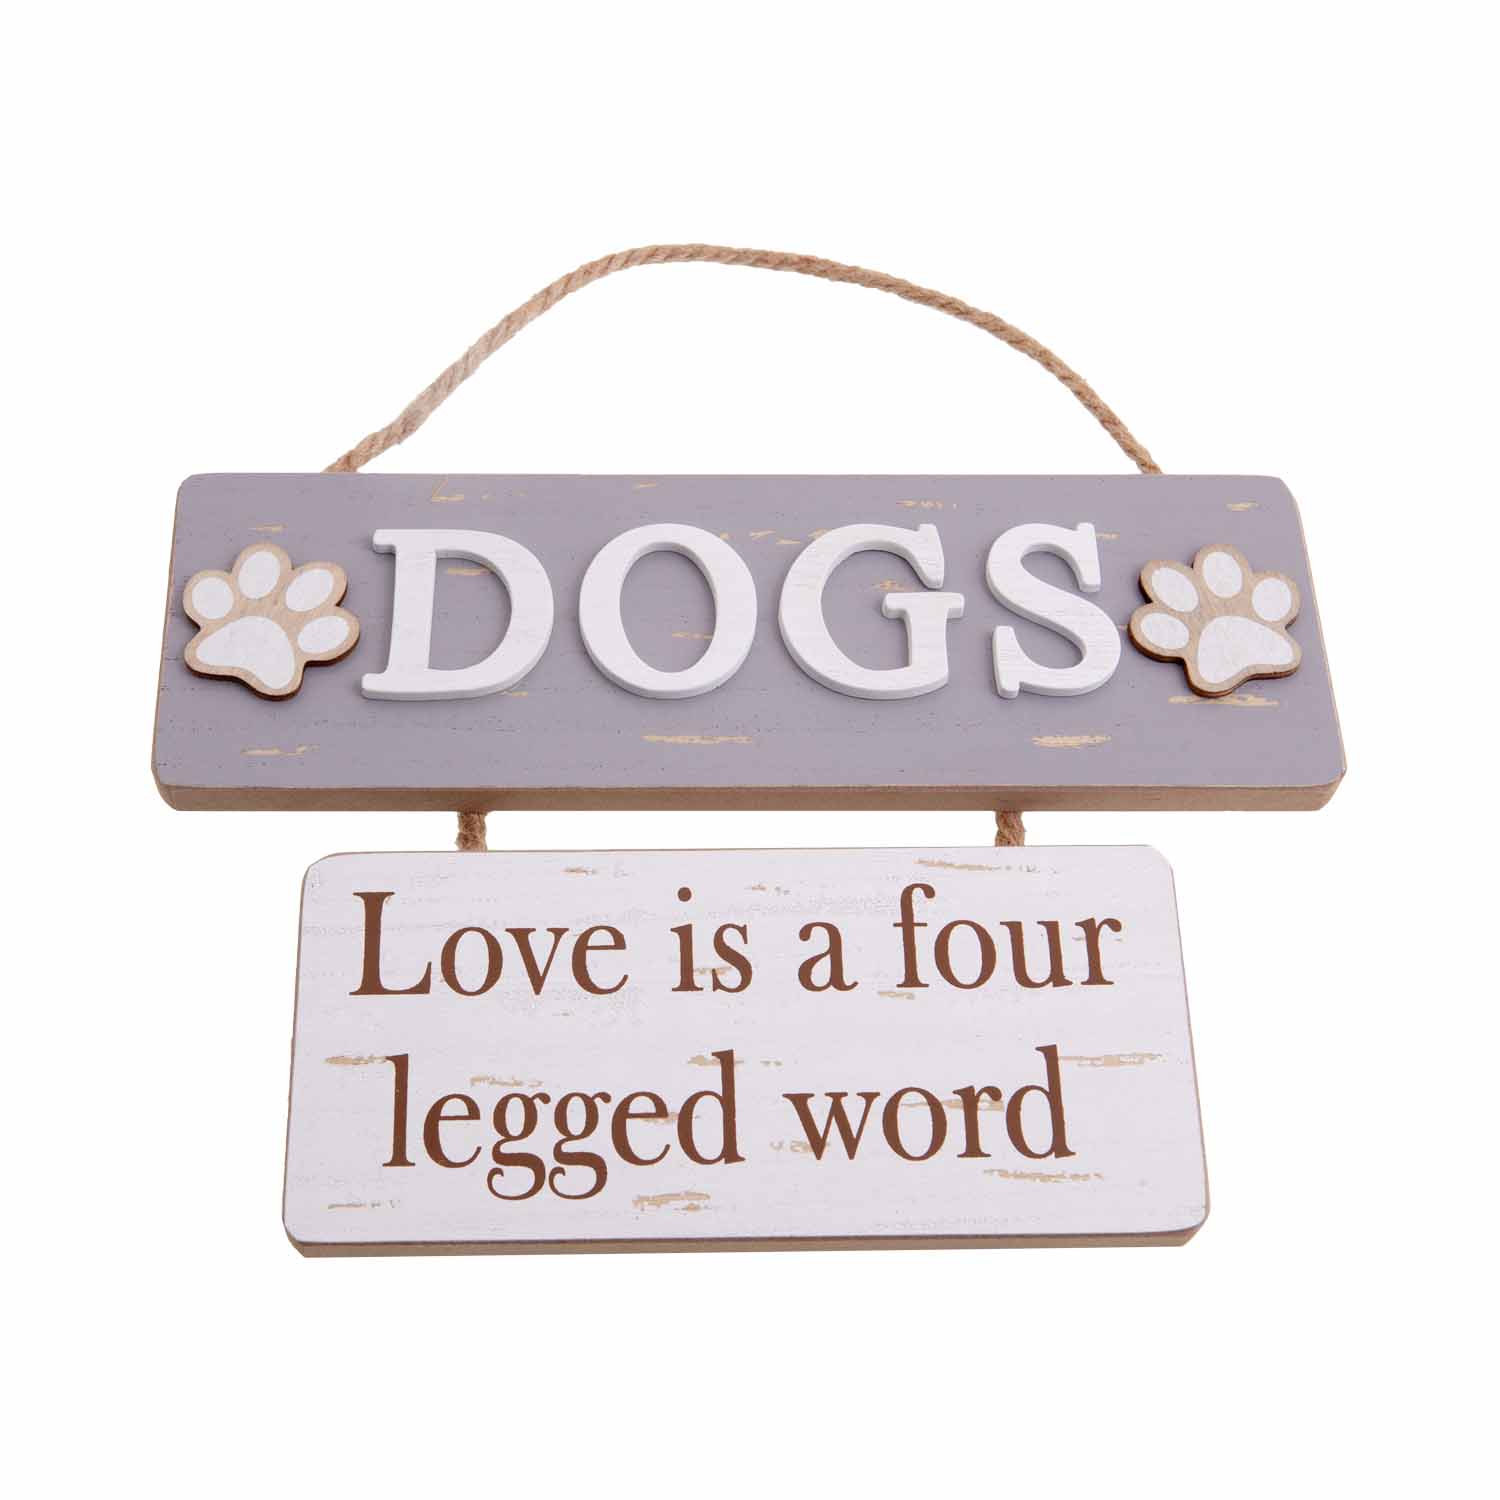 Dog Krazy Gifts - Dog, Love Is A Four Legged Word Boardwalk Style Sign, Part Of The Wide Range of Dog Signs available from DogKrazyGifts.co.uk